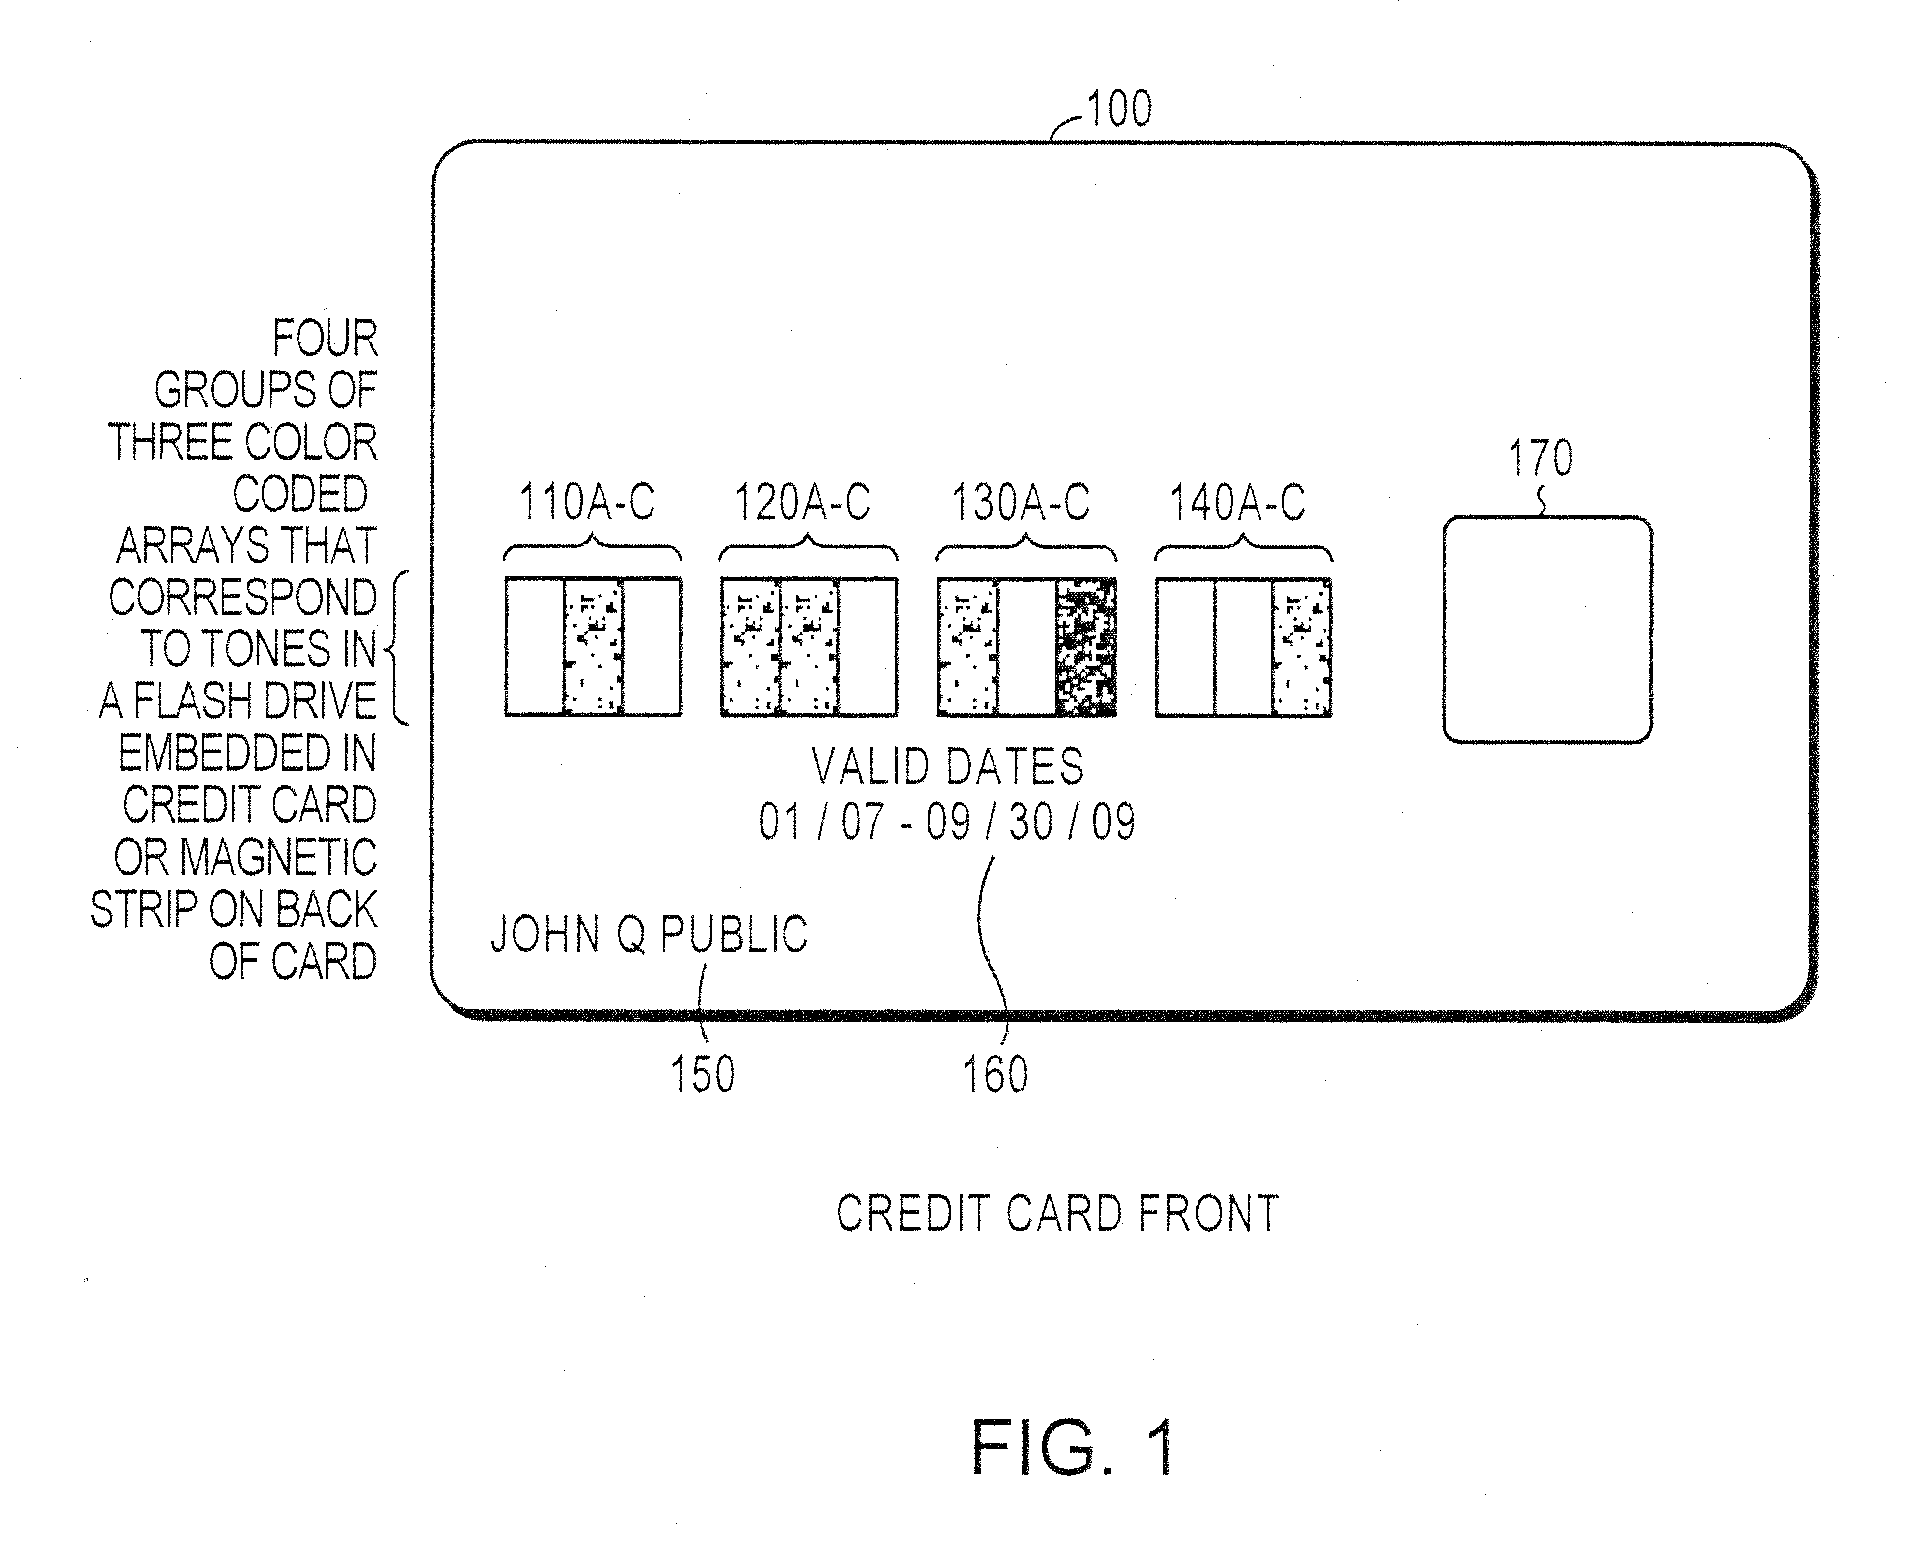 System and method for controlling secured transaction using color coded account identifiers